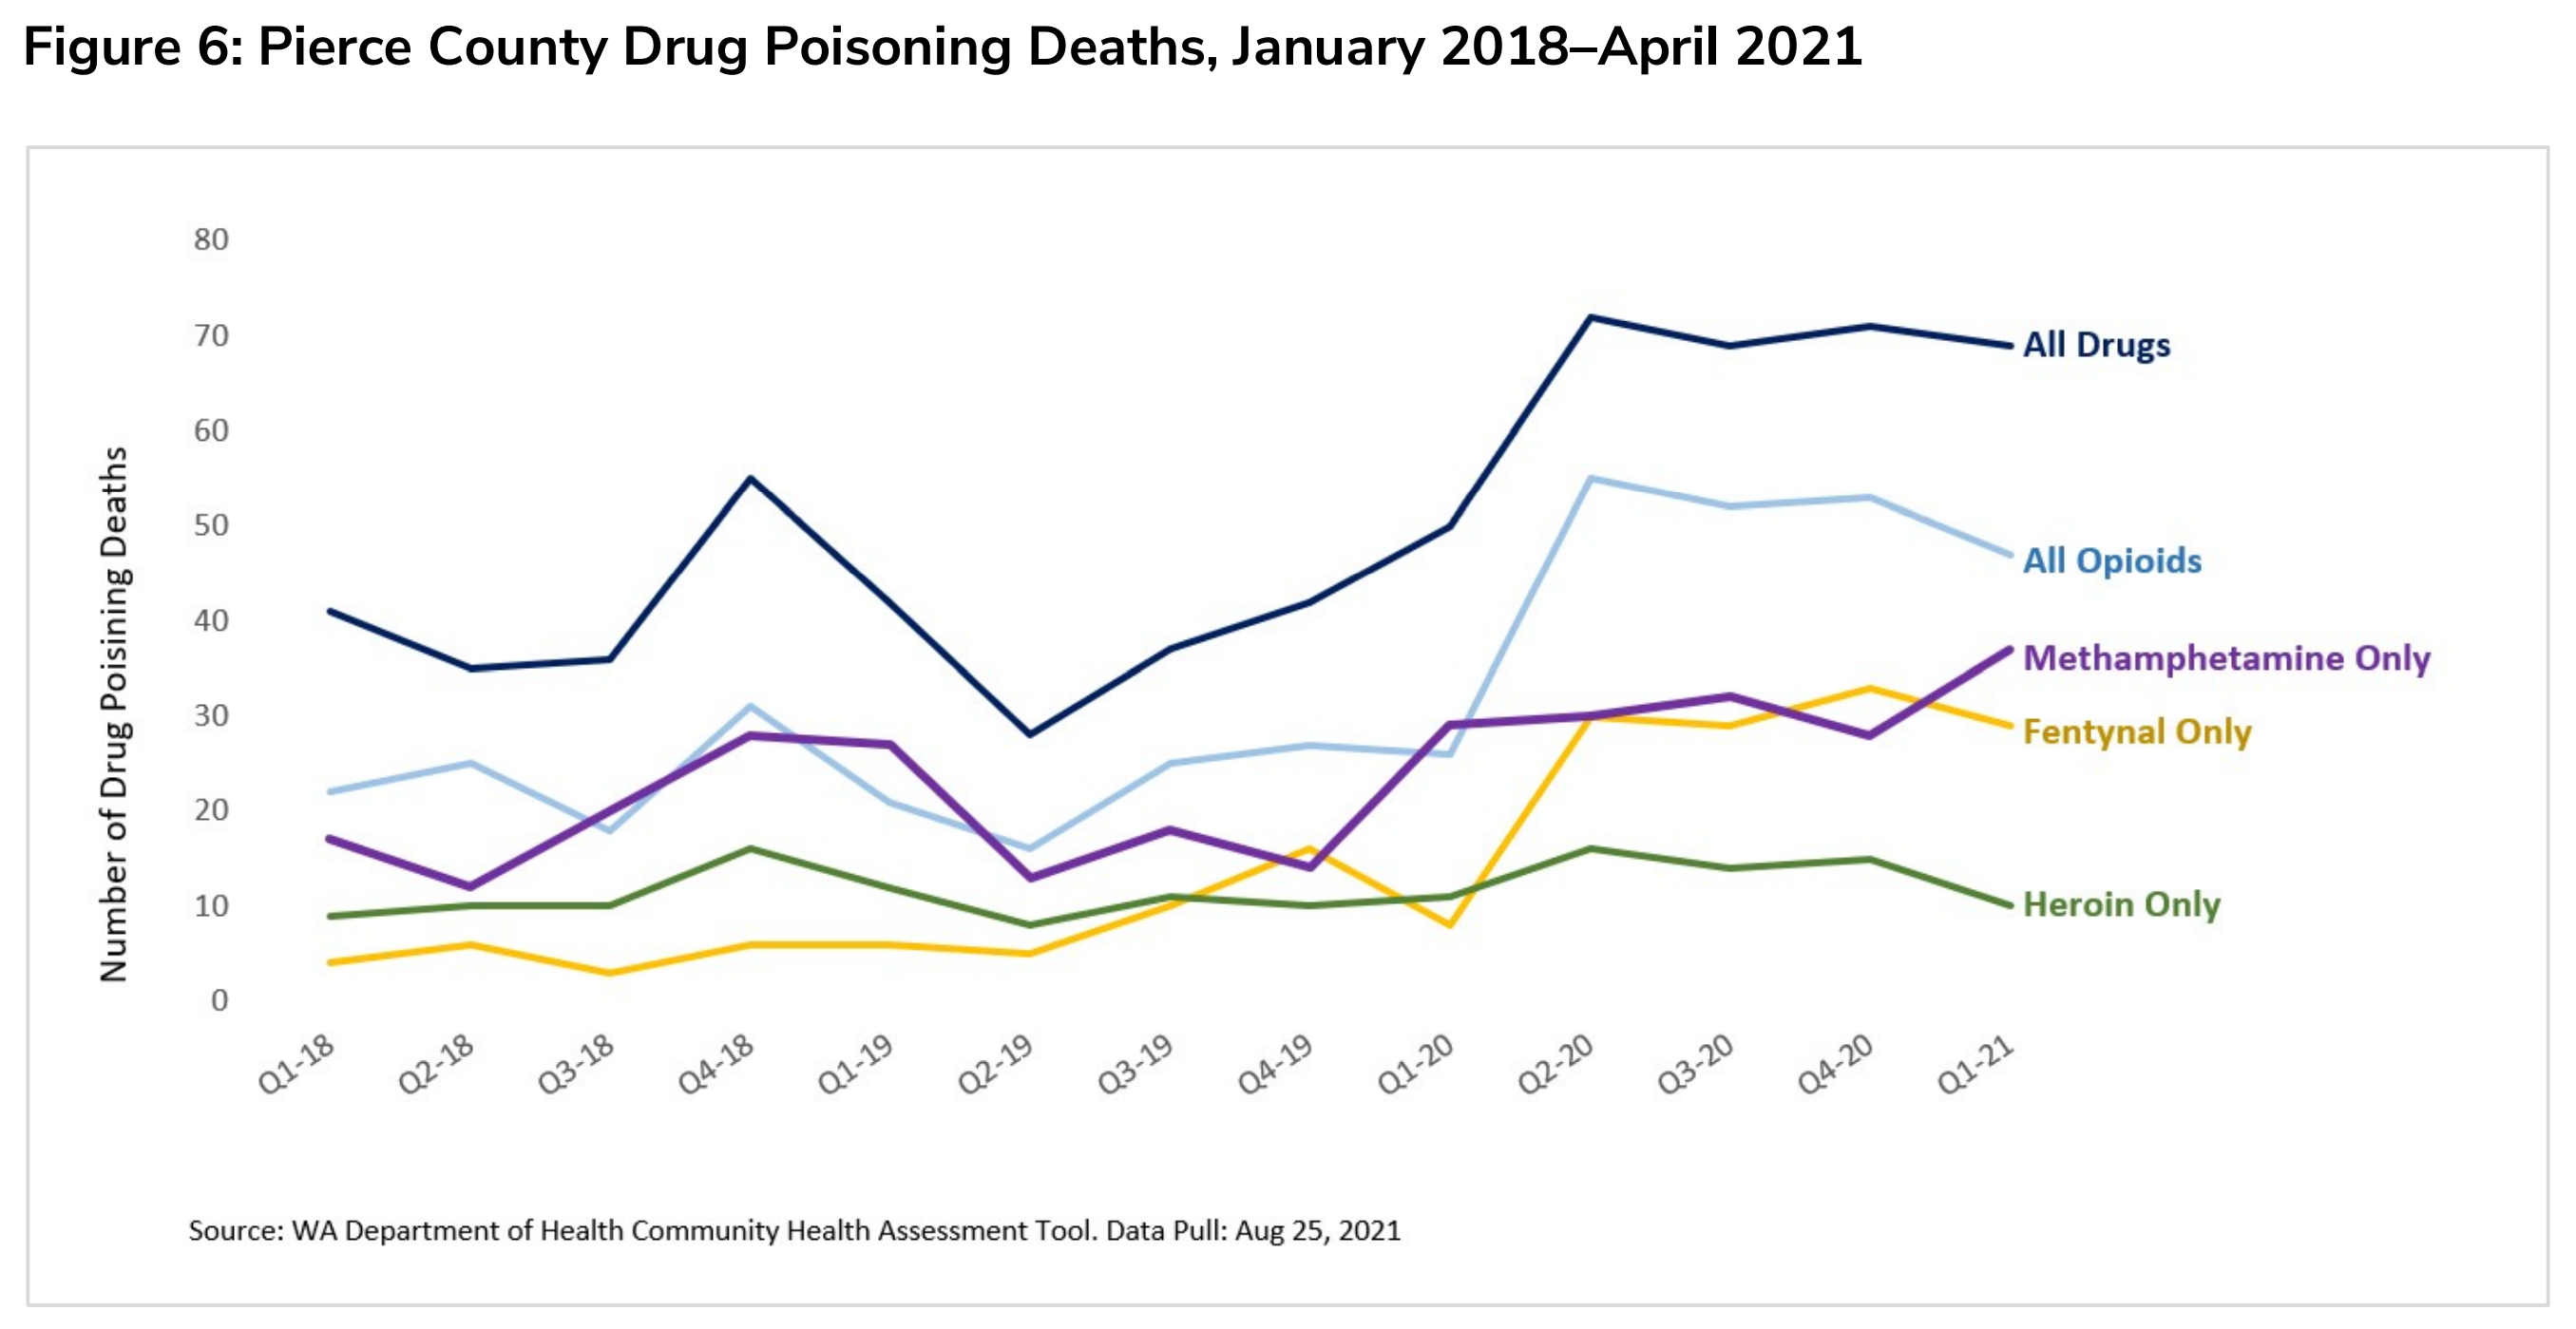 Pierce County drug poisoning deaths, January 2018–April 2021. Many of Pierce county's recent drug poisoning deaths included more than one drug. In 2019, Pierce County drug poisoning deaths were flattening along with state and were trending downward. However, drug poisoning deaths have risen dramatically in 2020 and 2021 despite increased harm reduction efforts, relaxed drug charges and relaxed Medications for Opioid Use disorder (MOUD) prescribing practices. Pierce County’s heroin deaths outpaced the State (comparison not shown). The number of heroin-involved deaths may be higher, since the body might metabolize heroin before labs detect it. Whites and males had the most poisoning deaths. Groups experiencing structural racism and inequitable health outcomes had the highest rates of poisoning deaths. These groups include American Indian/Alaska Natives, Hispanic/Latinx, and Black/African Americans. Deaths involving illicit fentanyl, a powerful synthetic opioid, continued to surge into 2021. Locally, illicit drug makers and distributors add fentanyl to counterfeit prescription pills, tar heroin, and powders like methamphetamine without users’ knowledge. As a result, fentanyl is cheaper, easier to obtain, gets users hooked more quickly and keeps them coming back for larger doses. Both Pierce County and the State have experienced dramatic increases in poisoning deaths involving methamphetamine and other stimulants in 2020 and 2021, to which Naloxone (an emergency opioid blocker) doesn’t respond. Graphic: TPCHD